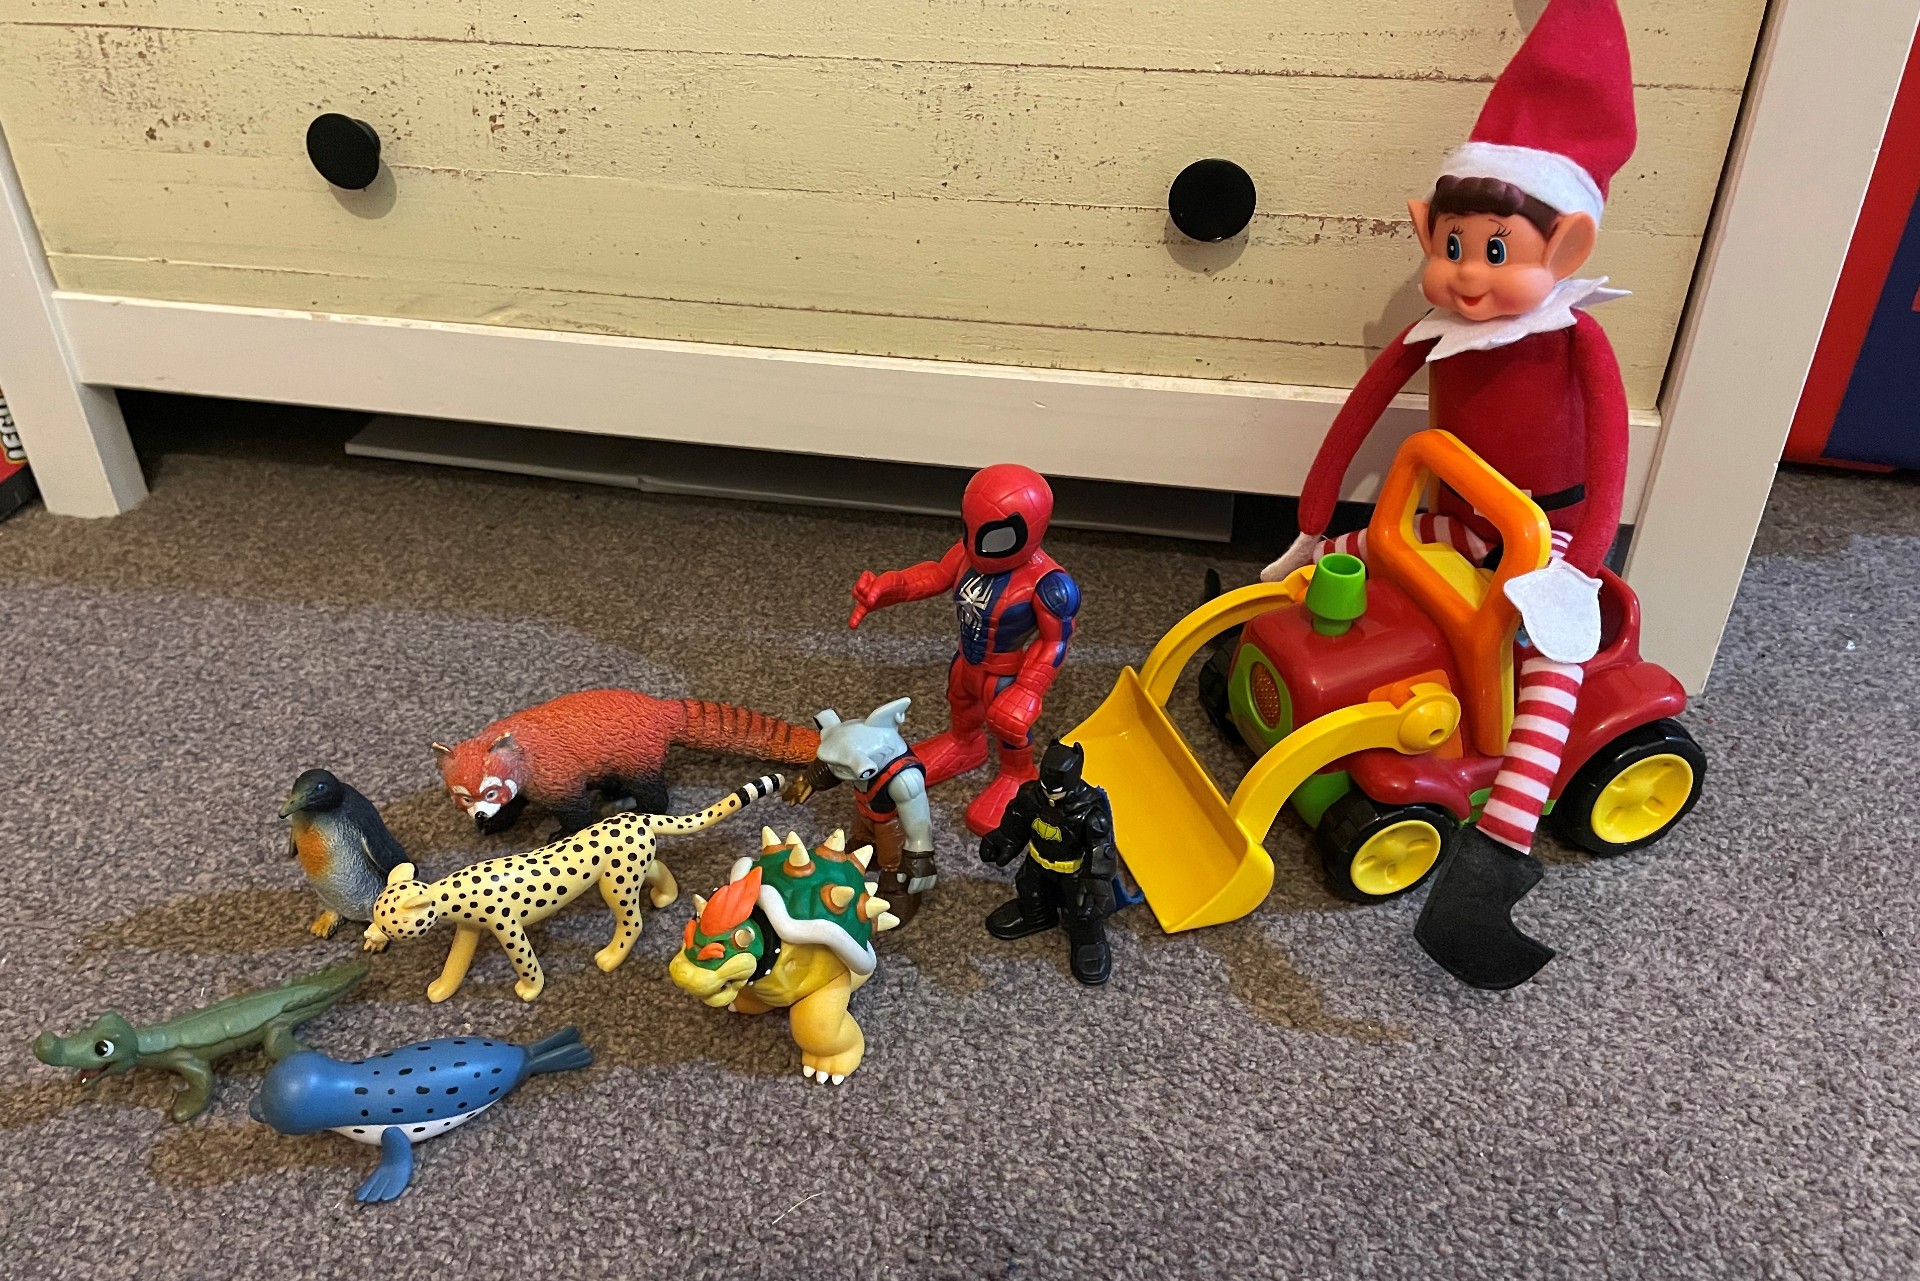 Elf on the shelf on a tractor sleigh pulled by a collection of sea creatures and action figures